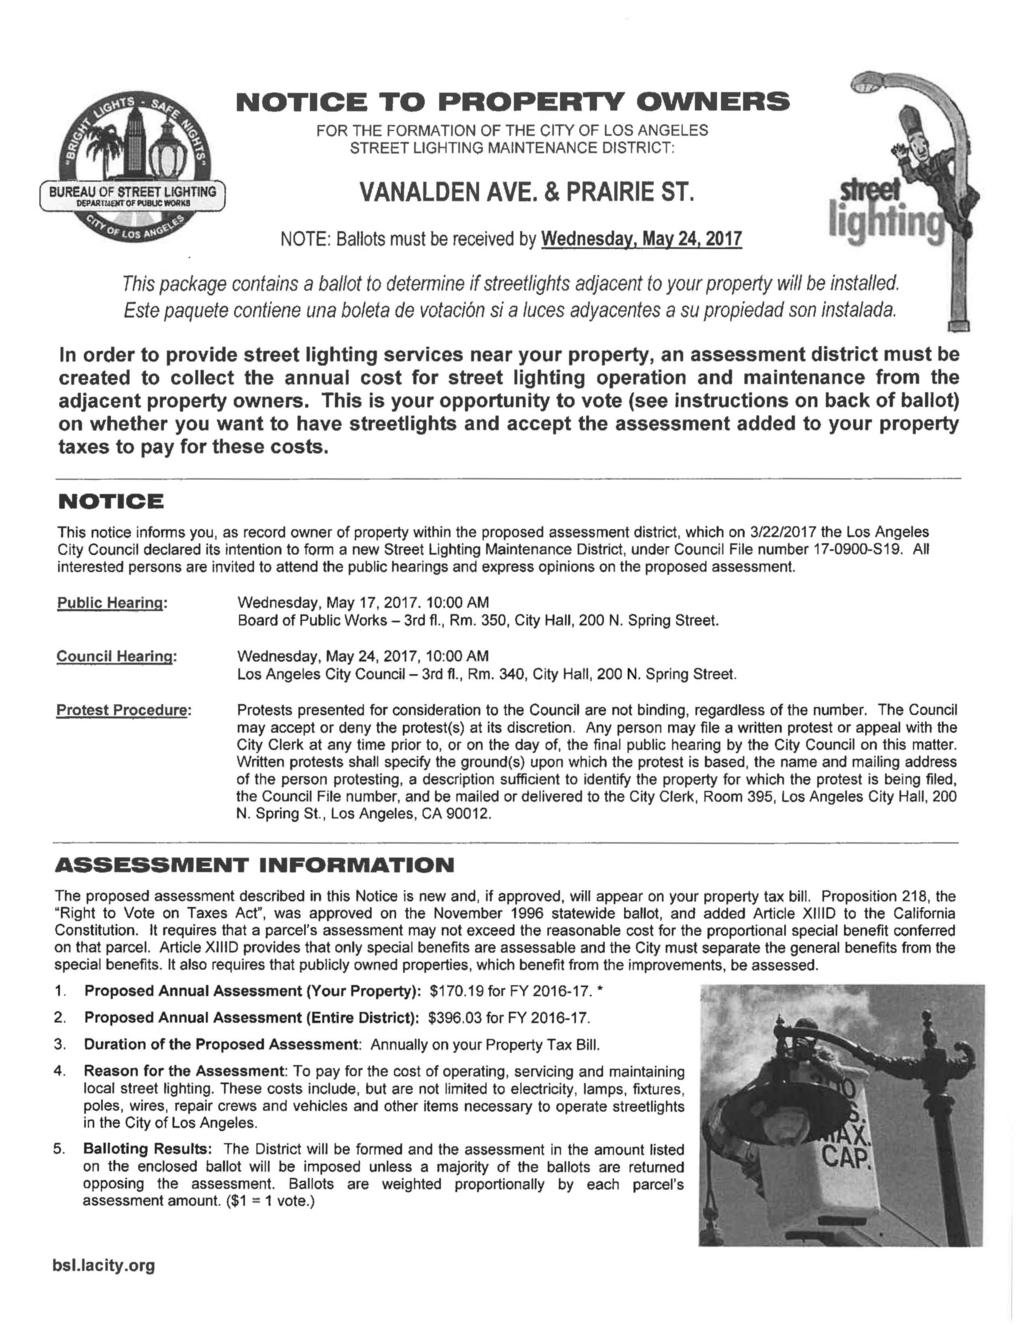 NOTICE TO PROPERTY OWNERS FOR THE FORMATION OF THE CITY OF LOS ANGELES STREET LIGHTING MAINTENANCE DISTRICT: BUREAU OF STREET LIGHTING DEPiHriaeKroFKiBocwoiiKa VANALDEN AVE. & PRAIRIE ST.